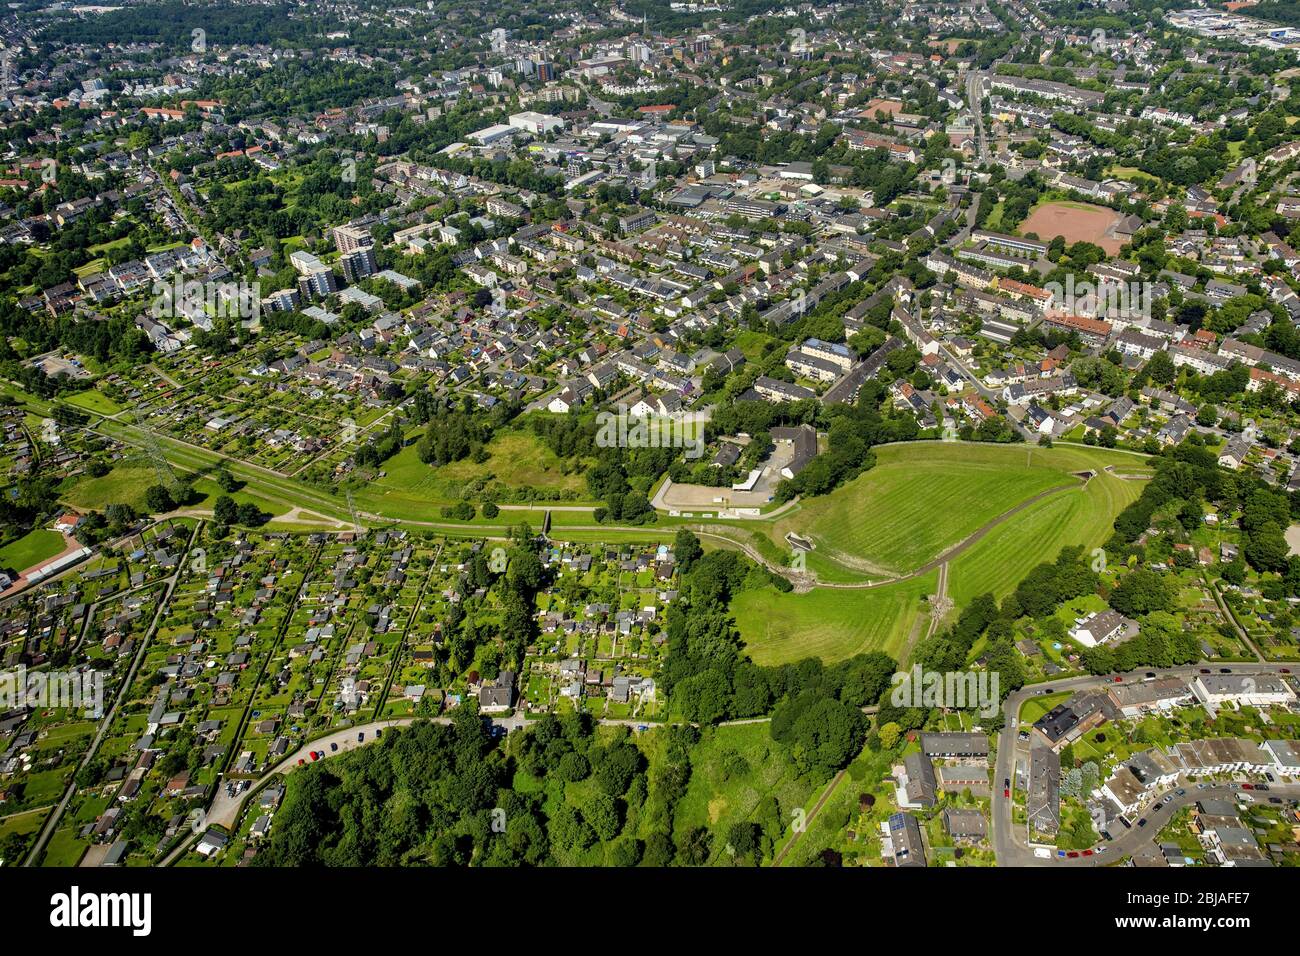 , District Bergeborbeck the Borbecker Muehlenbach in the urban area in Essen, 23.06.2016, aerial view, Germany, North Rhine-Westphalia, Ruhr Area, Essen Stock Photo